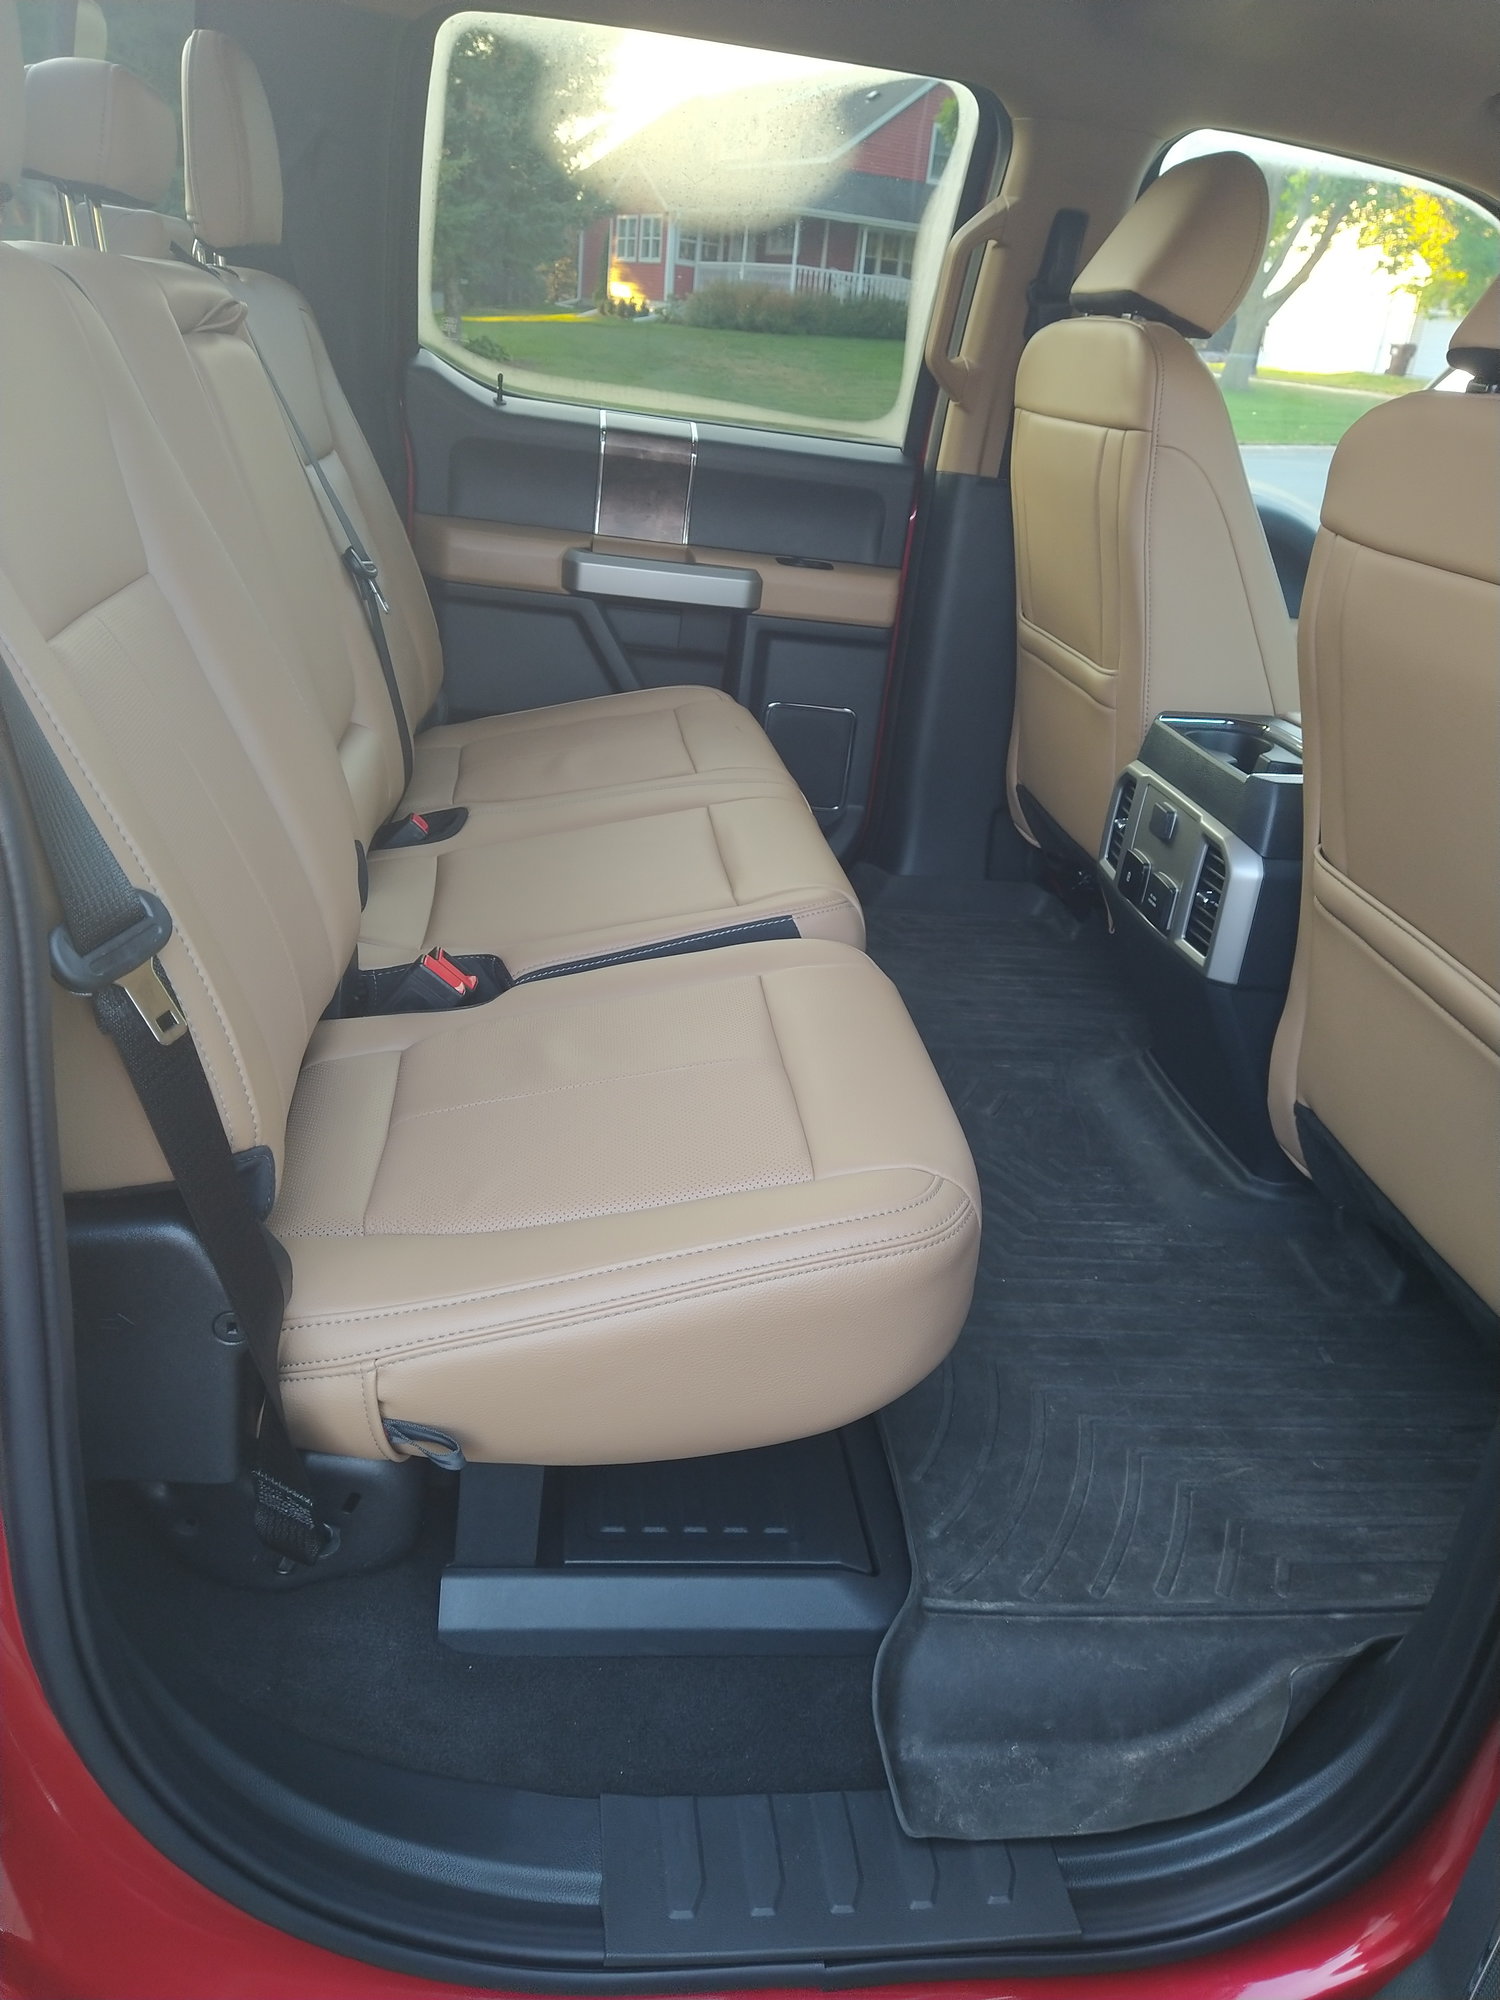 Baja interior? Ford Truck Enthusiasts Forums